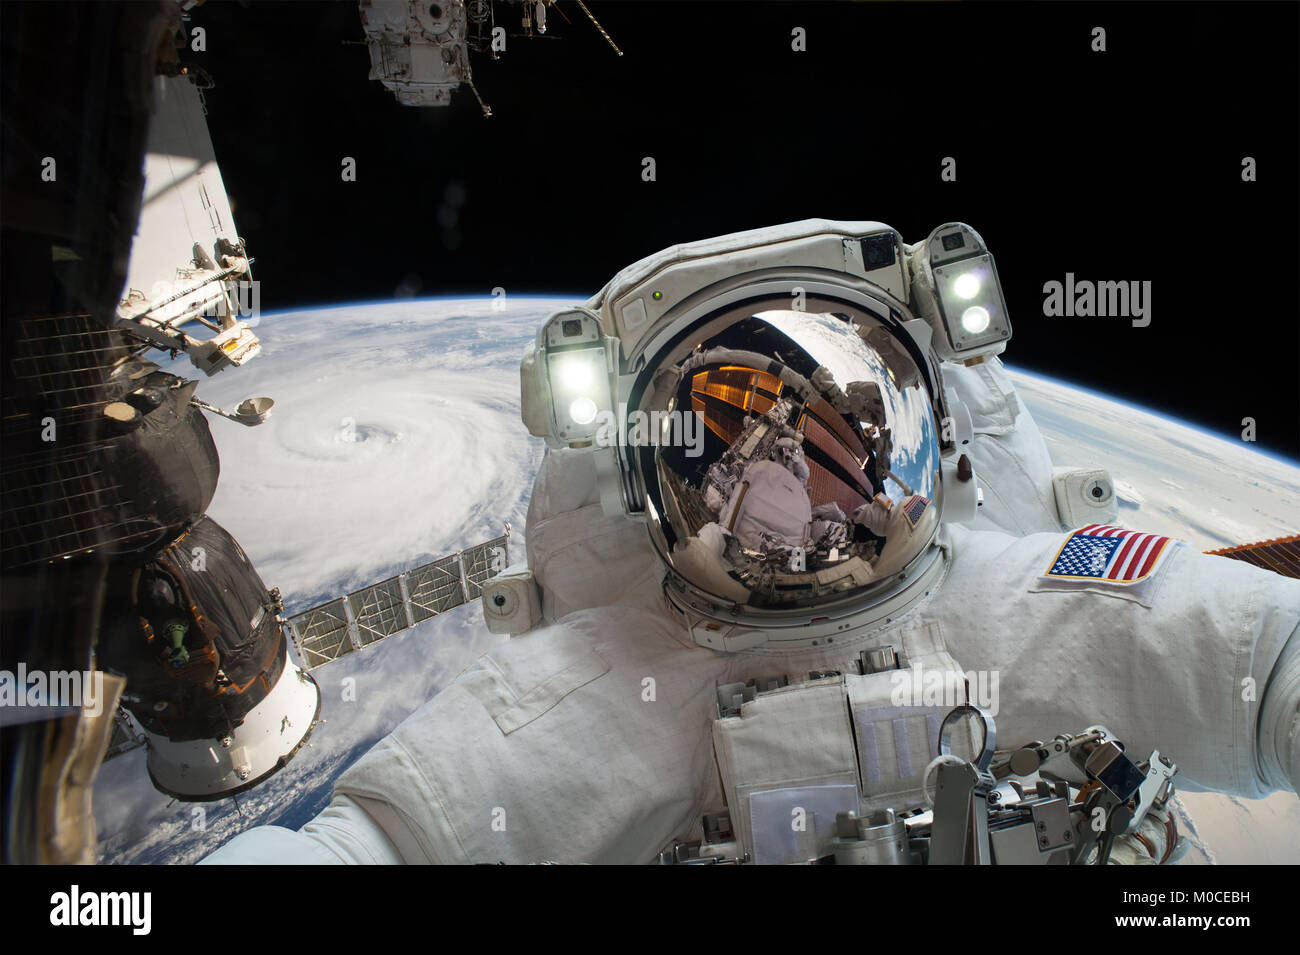 Astronaut in outer space against the backdrop of the planet earth. Elements of this image furnished by NASA. Stock Photo